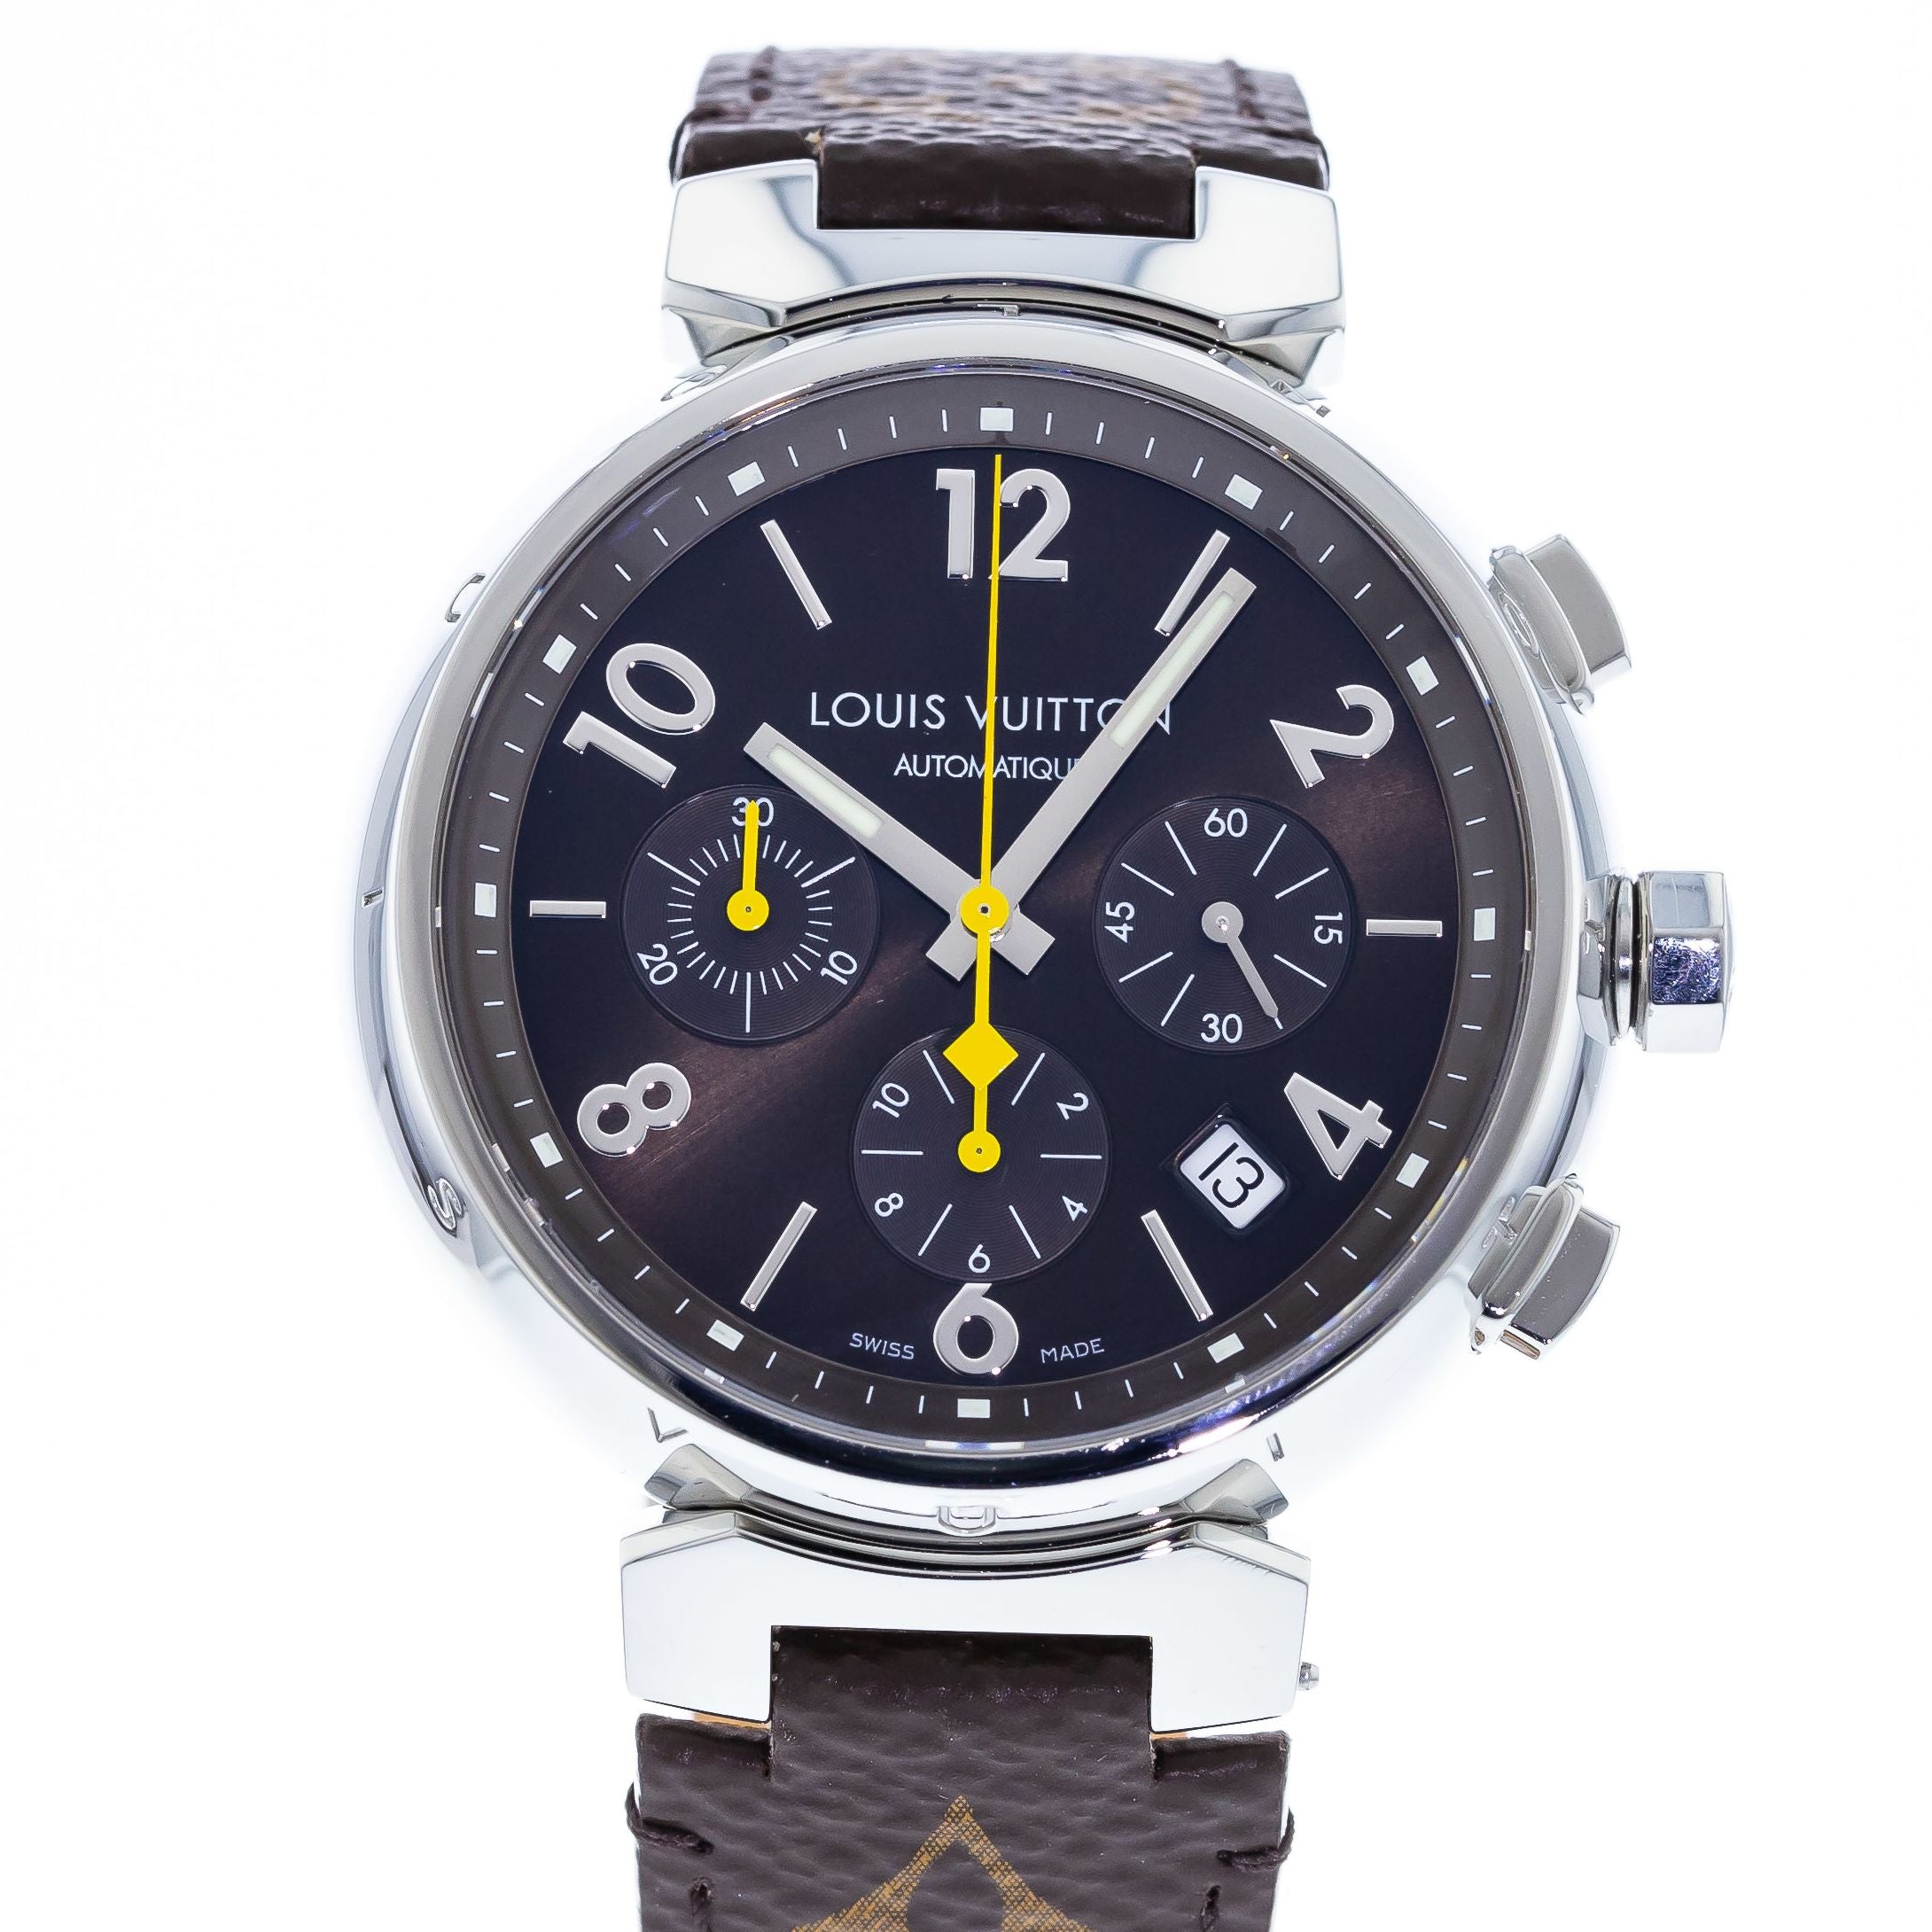 For LV Watch Raised Mouth for Louis Vuitton Tambour Series Q1121